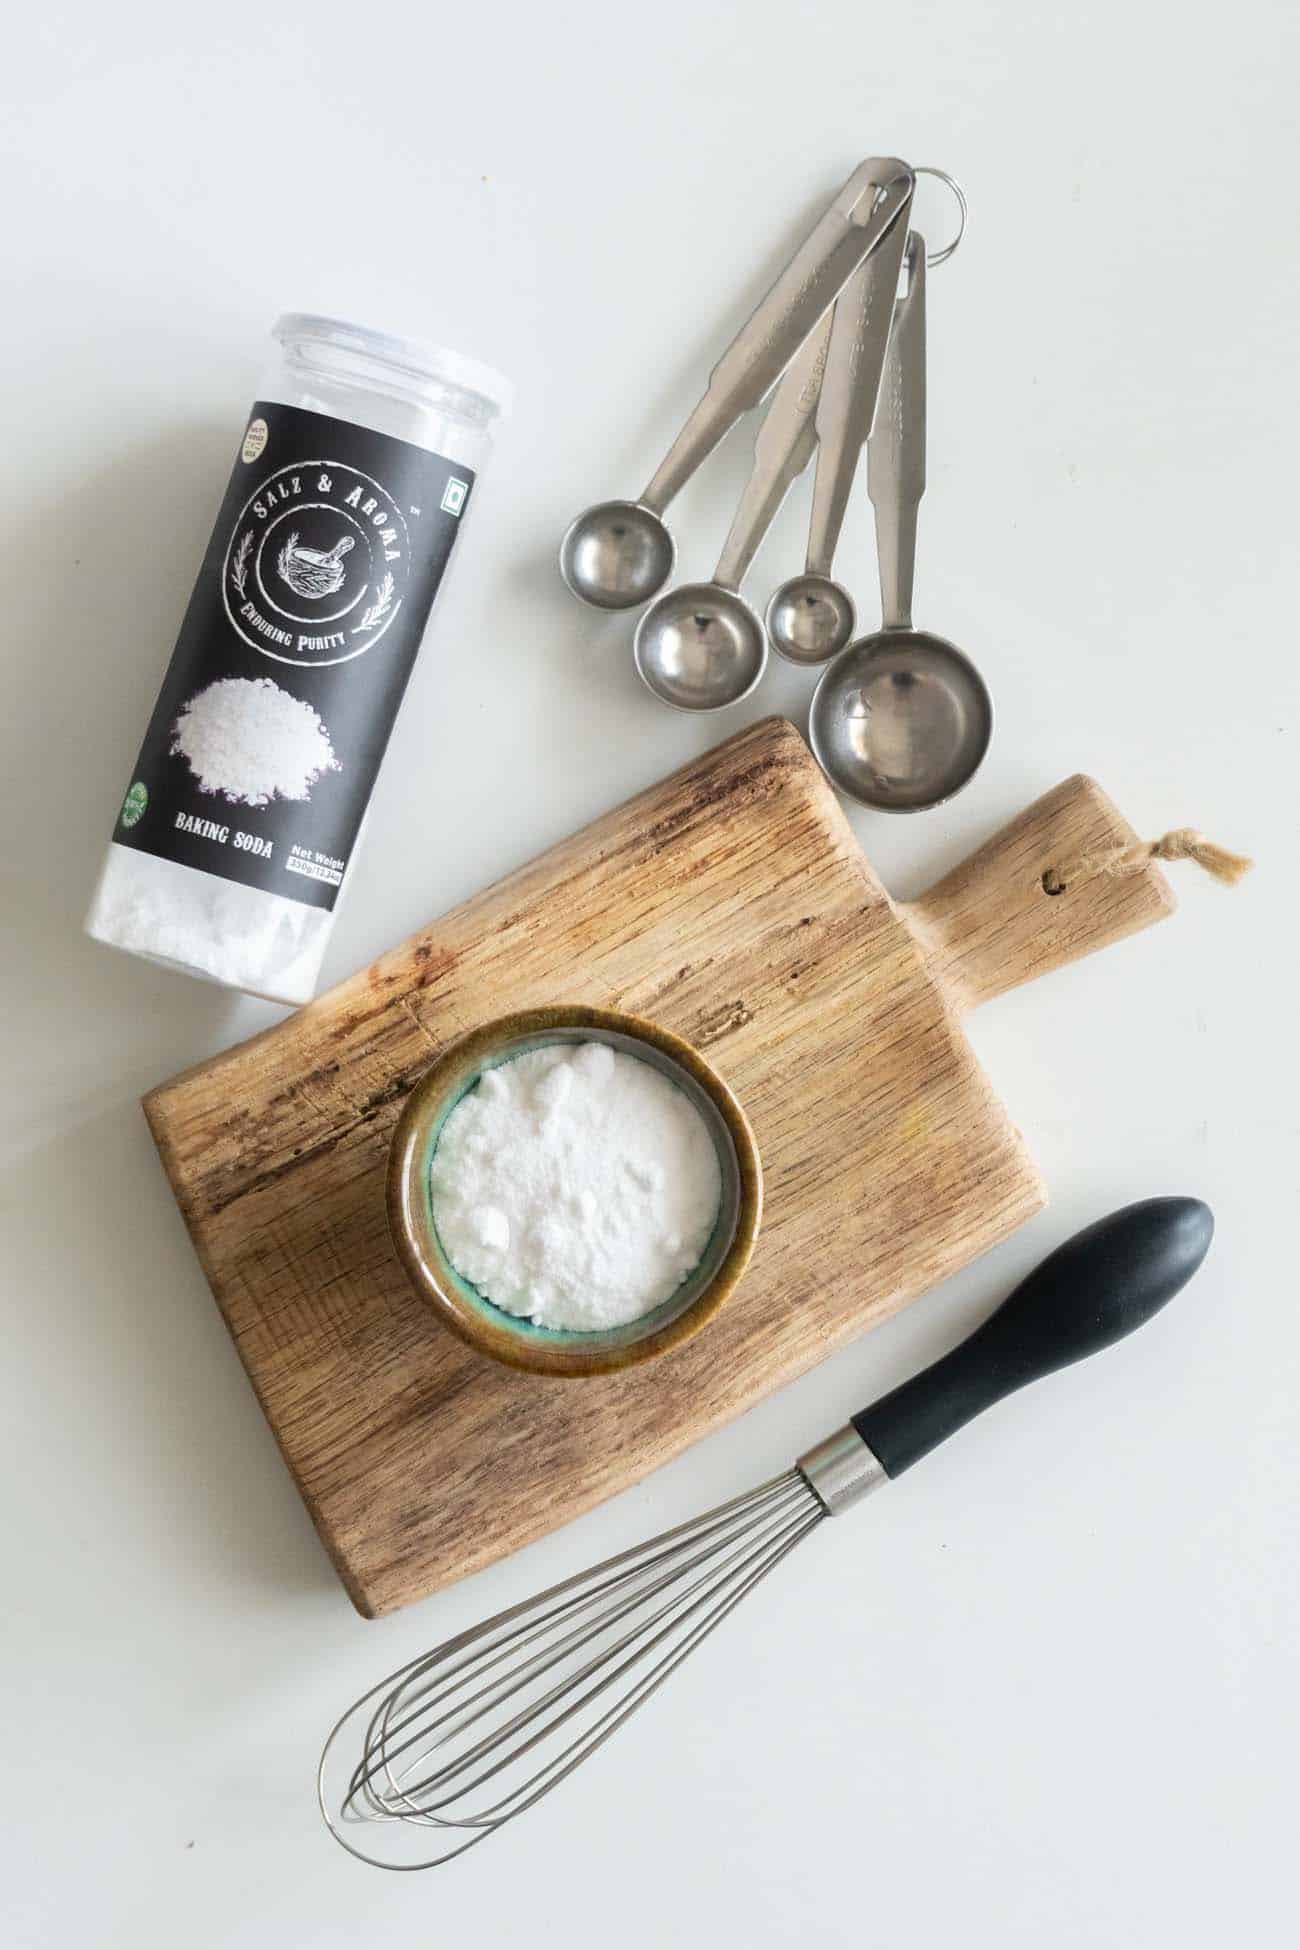 picture of baking soda in a cup on a chopping board with a whisk and measuring spoons on the side